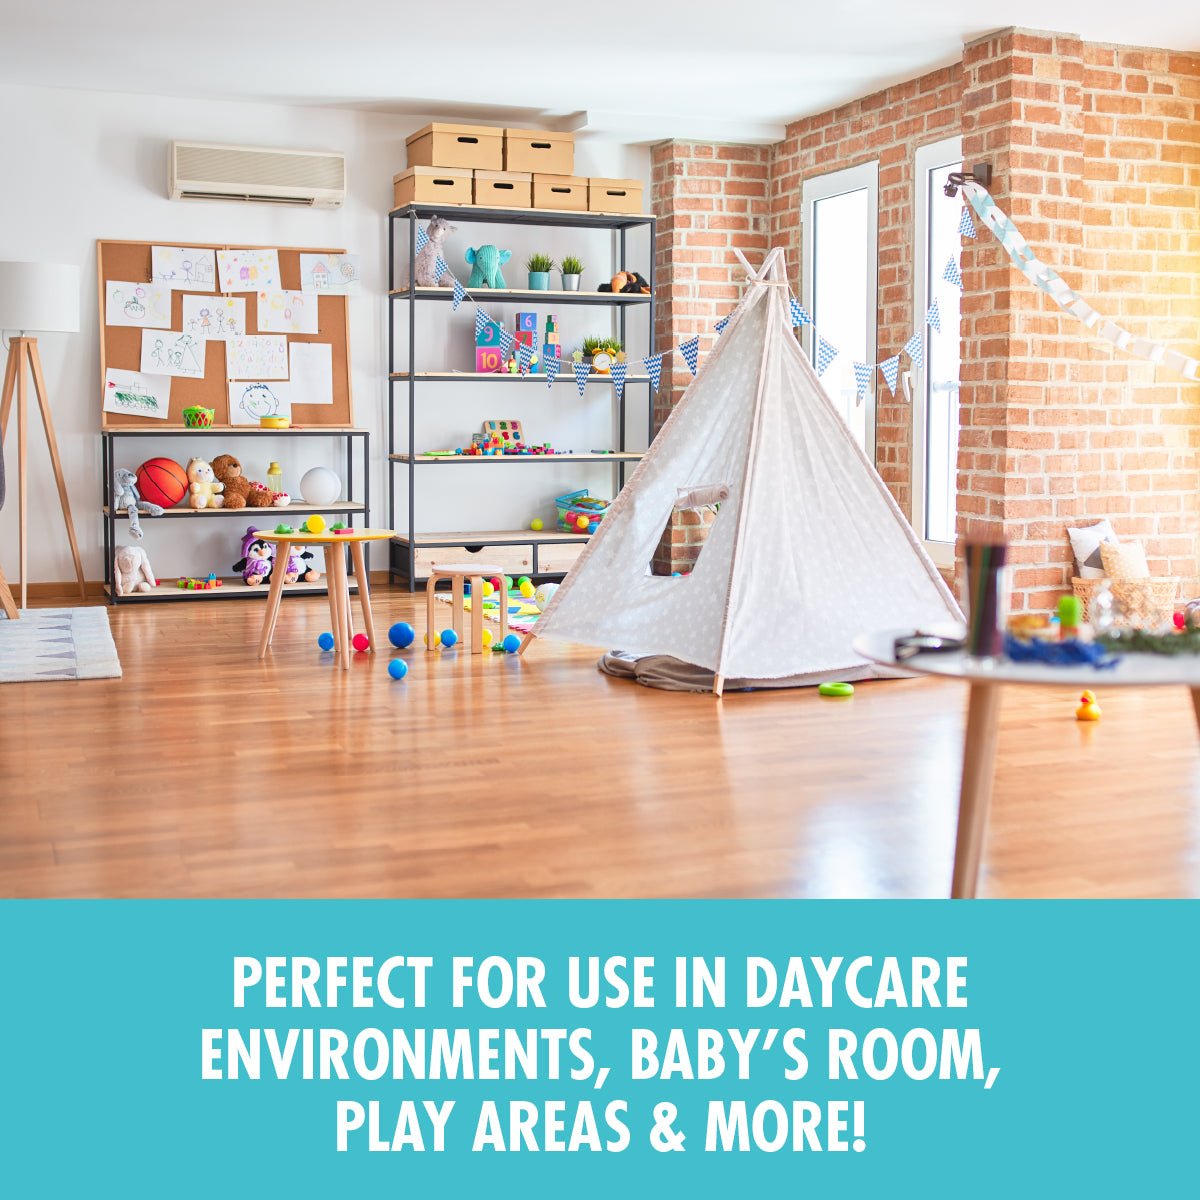 ProBio® Odor Out - Urine Odor Remover is perfect for use in daycare environments, baby's room, play areas & more!